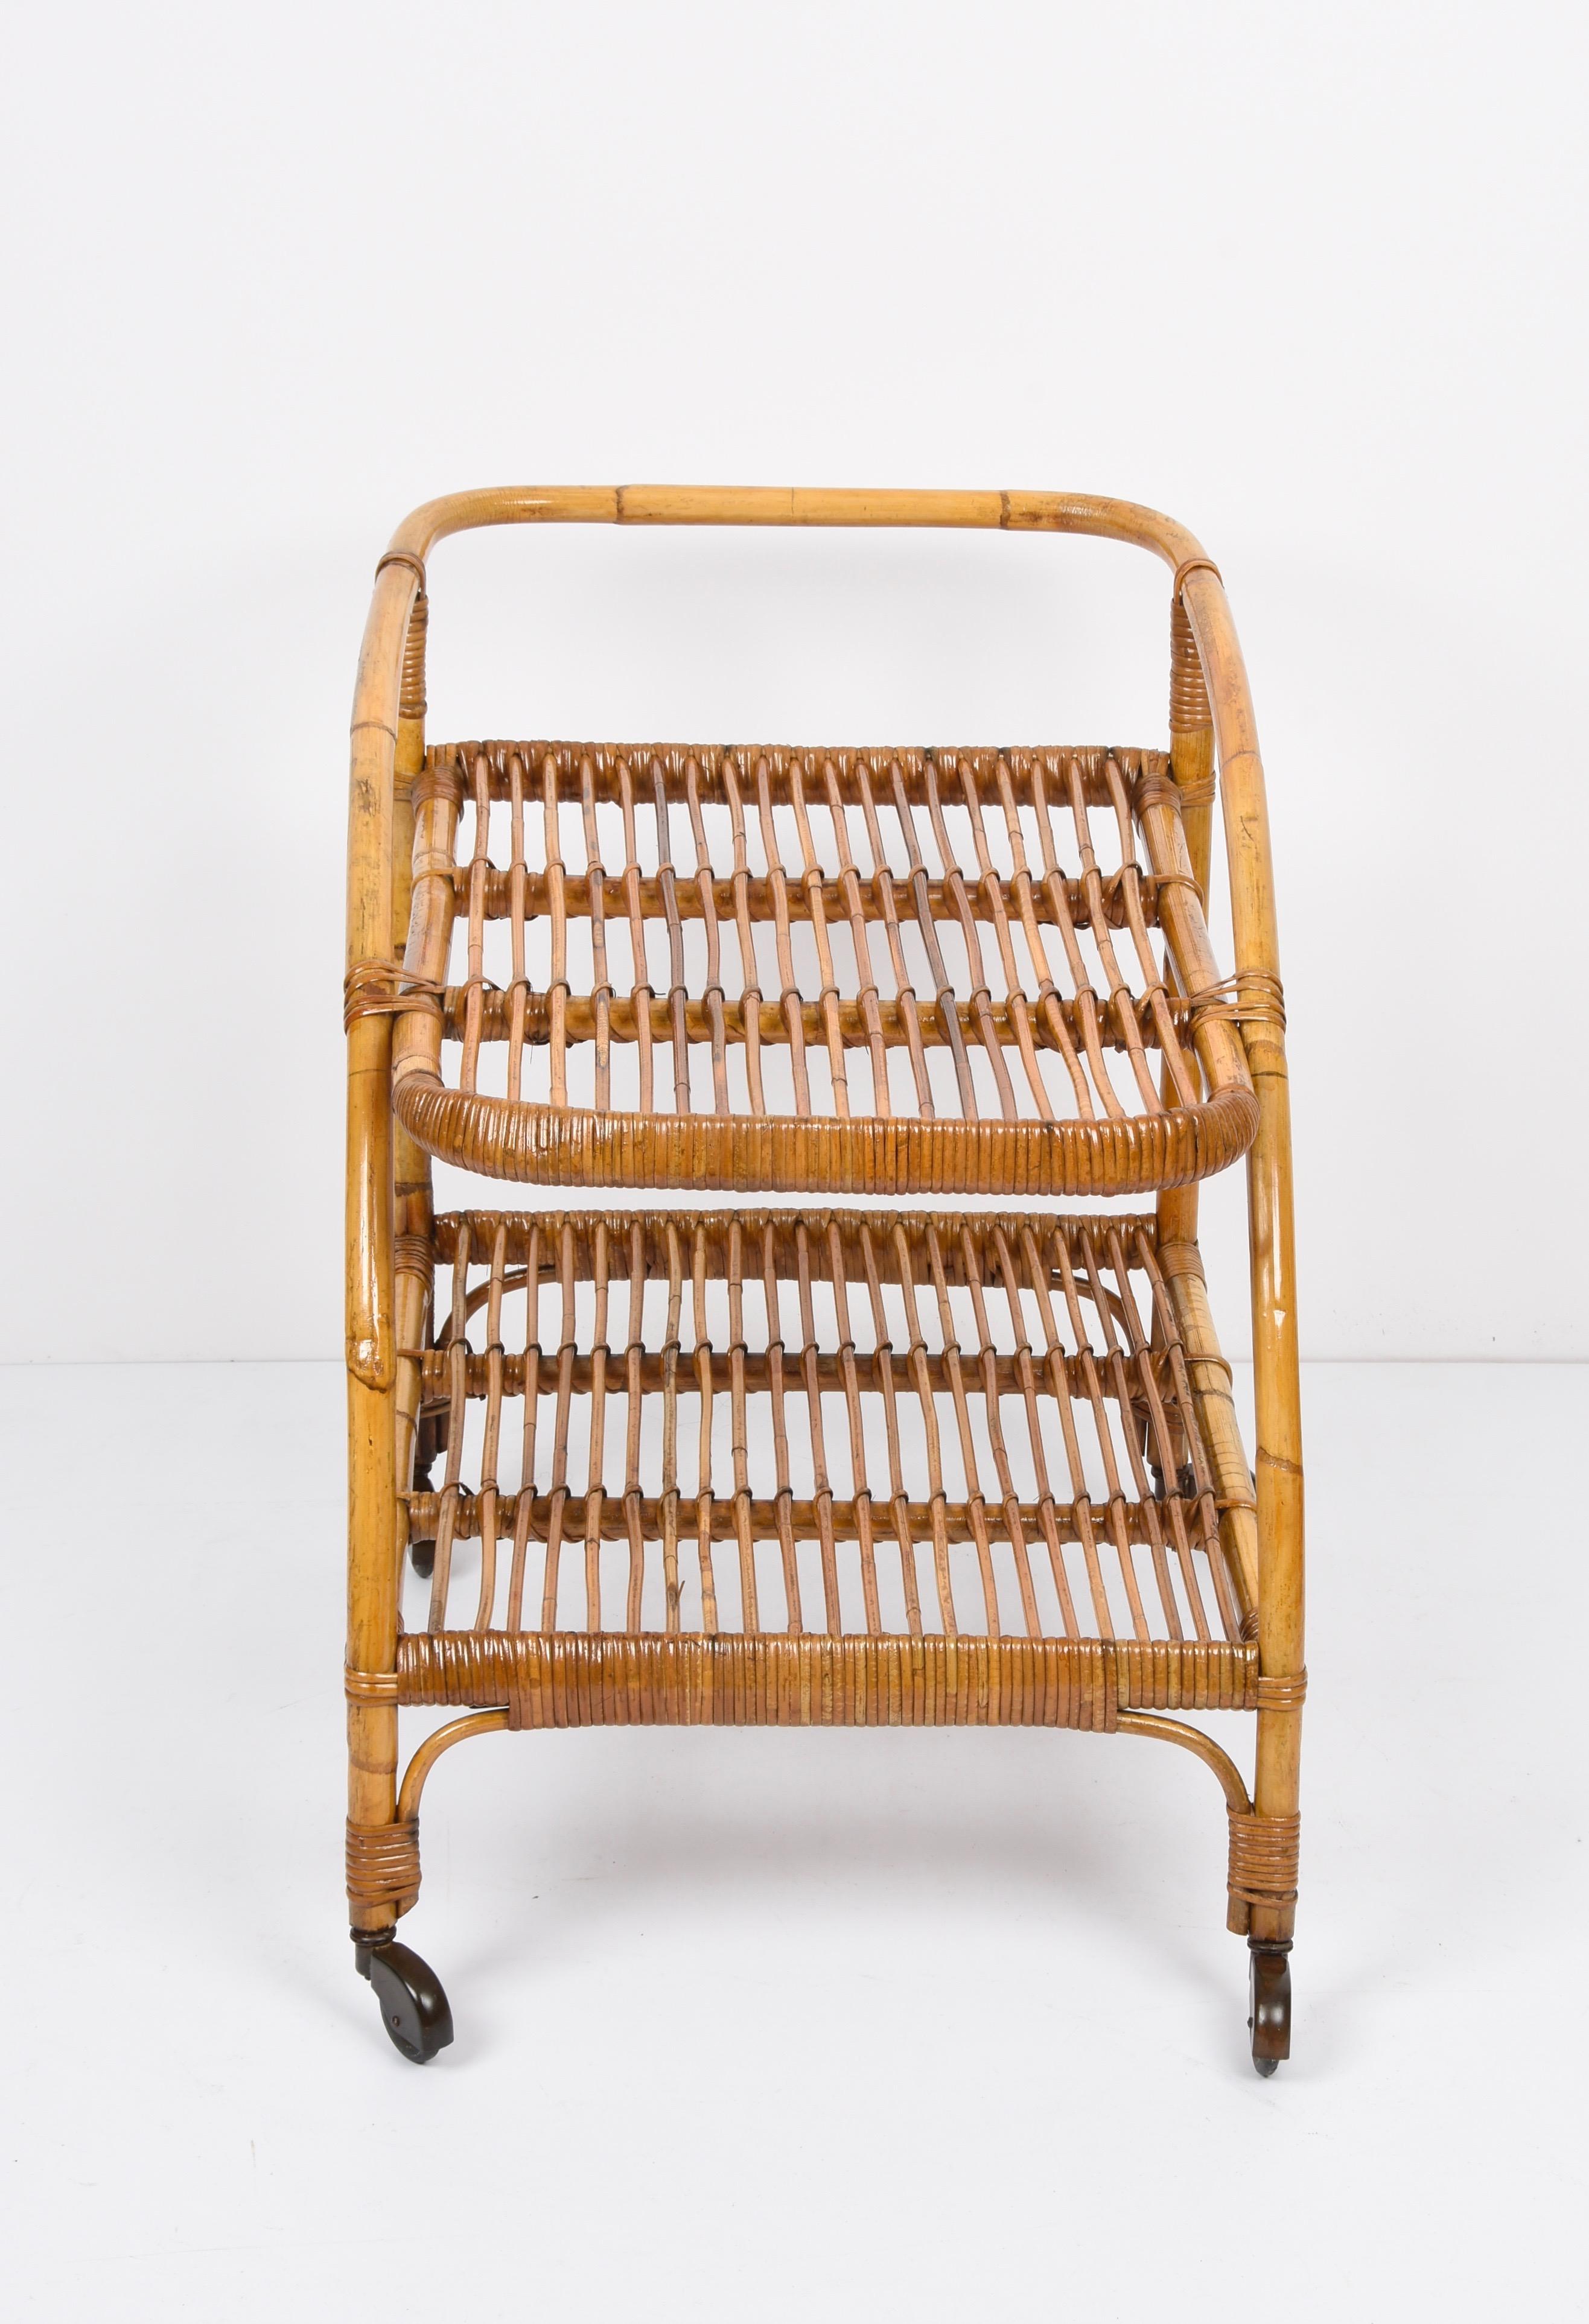 Midcentury Bamboo and Rattan Italian Serving Bar Cart Trolley with Wheels, 1950s 3